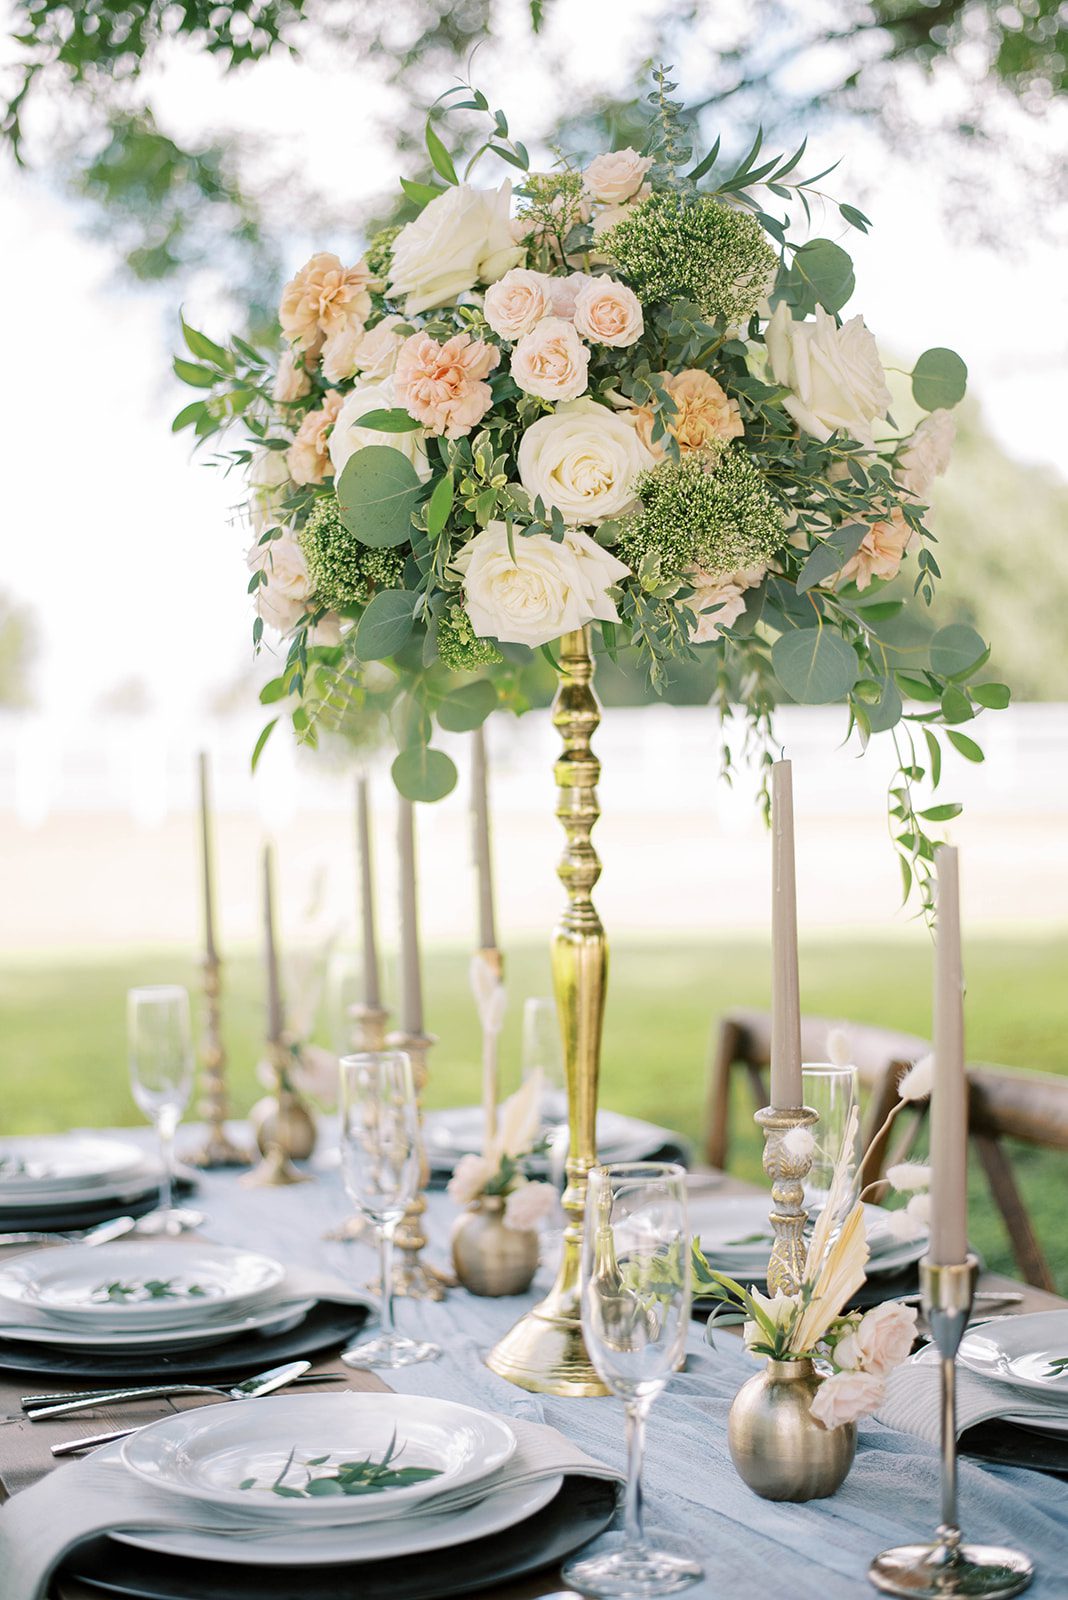 Top Reasons To Hire A Wedding Planner with Bridgerton inspired wedding with a tall gold stand holding a bouquet of rose and light greenery with candle sticks and other ornate glasses on the table